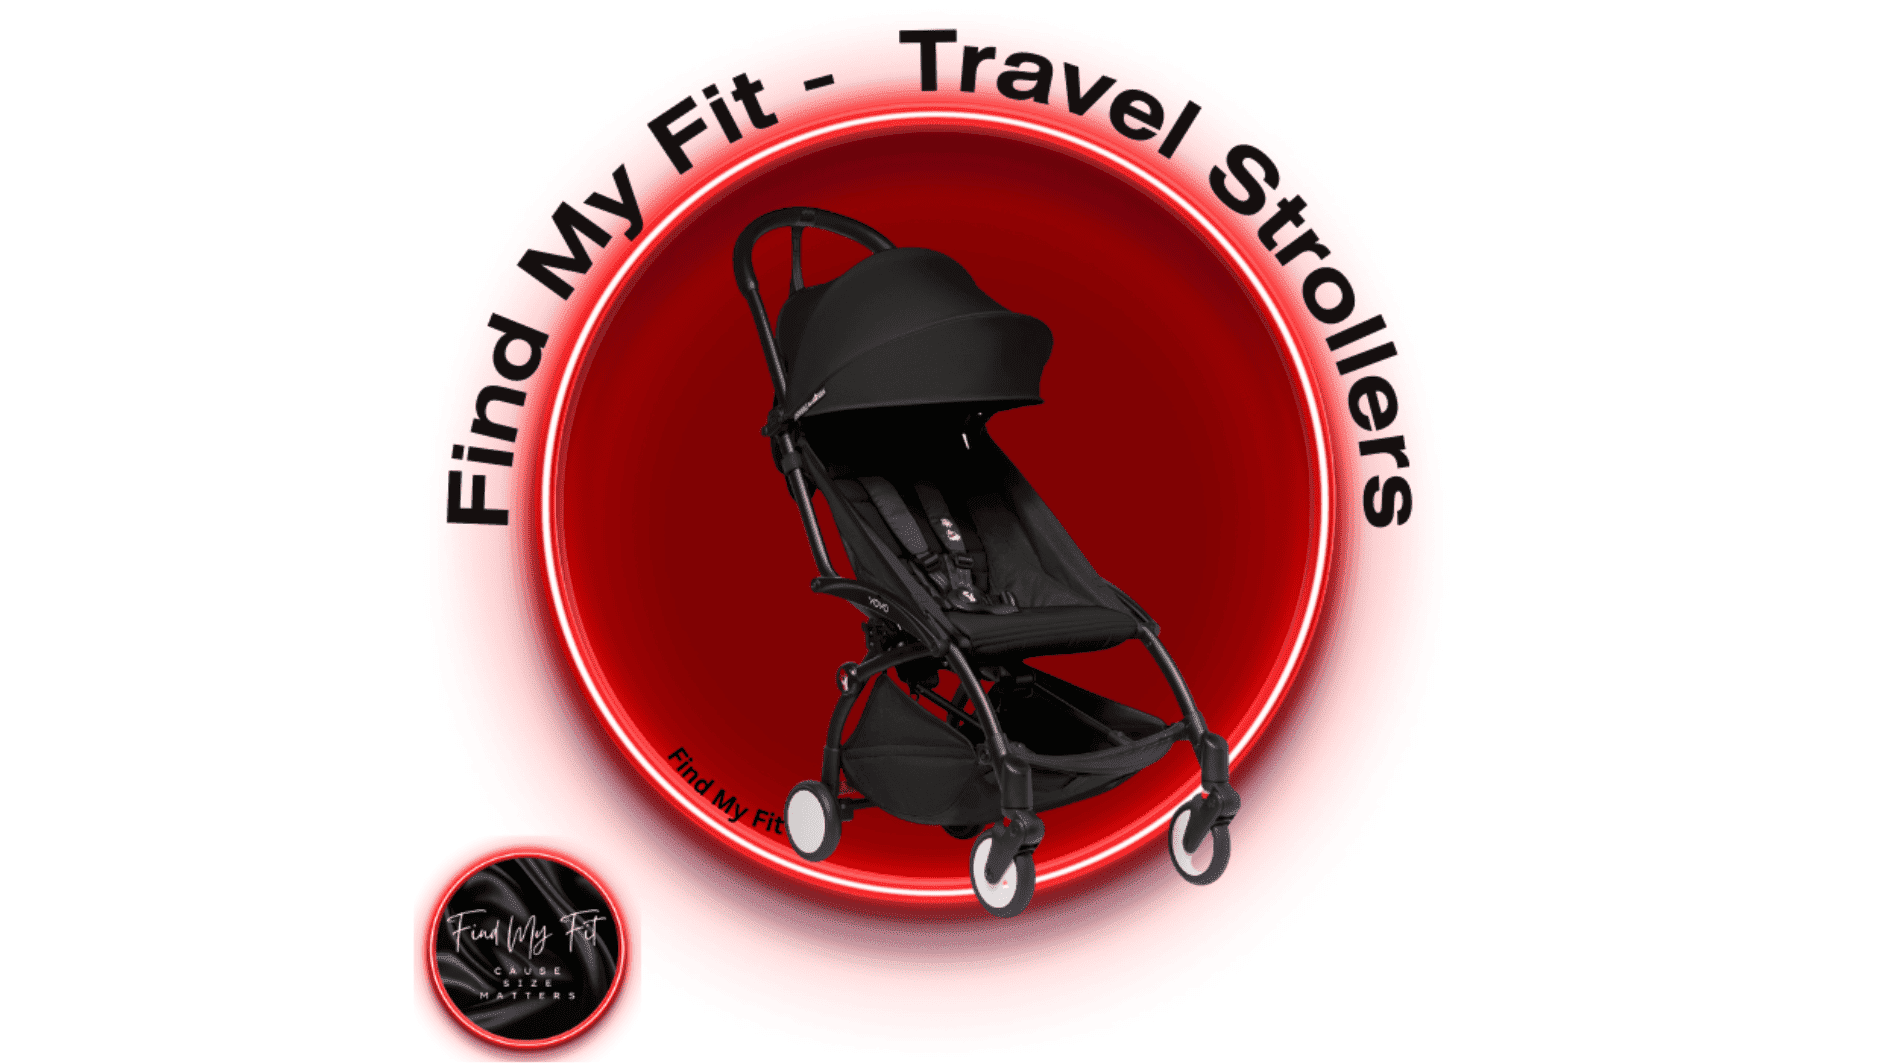 Babyzen Yoyo+ review - The best stroller for air travel